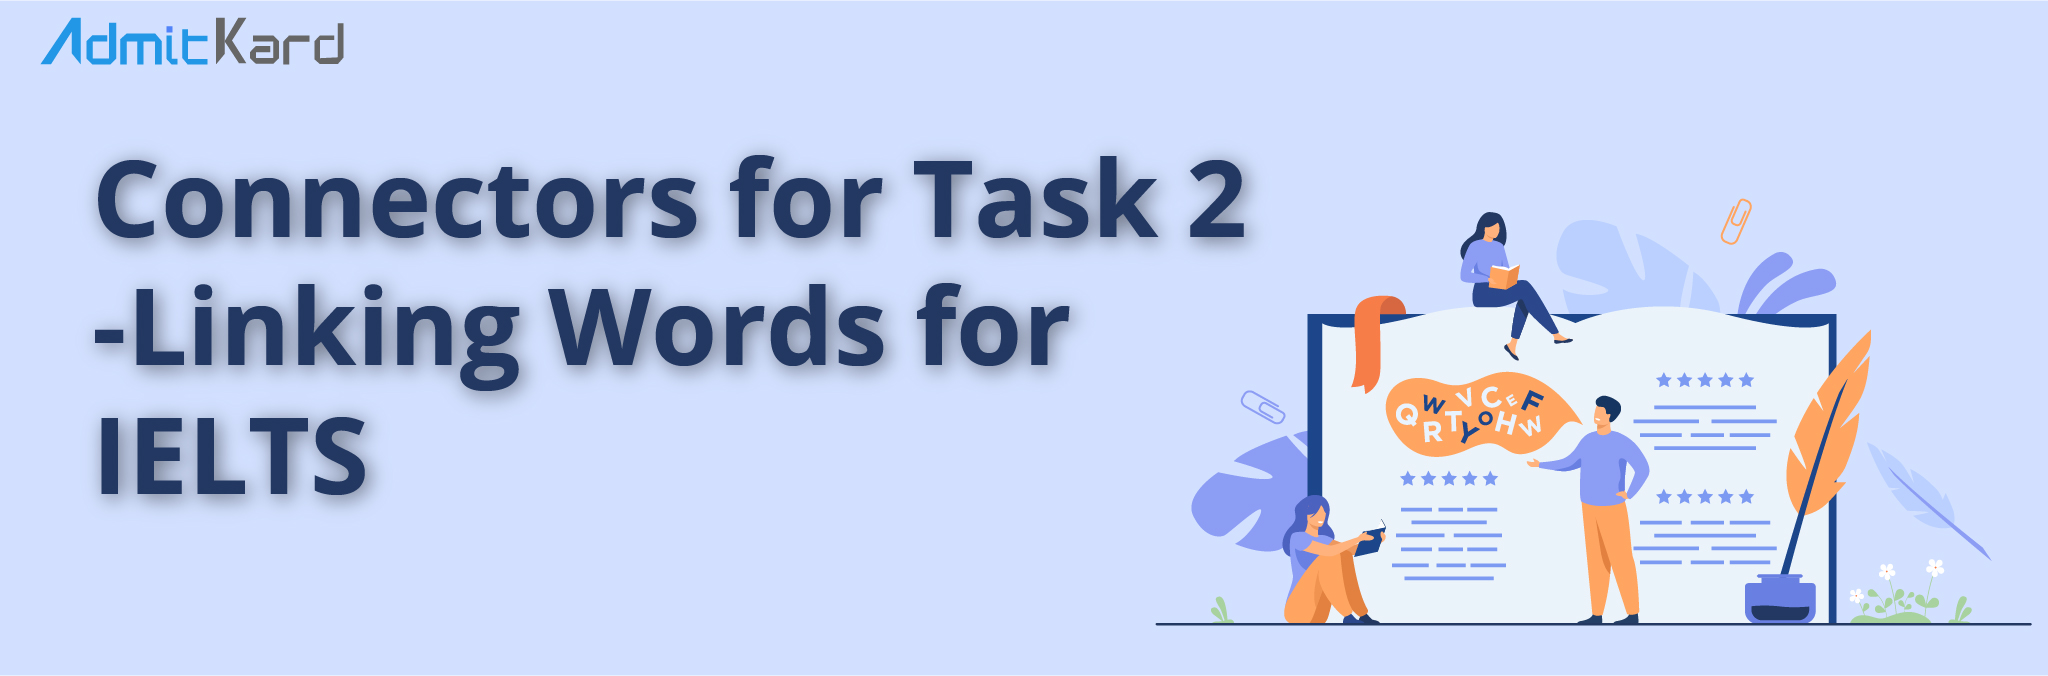 Connectors-for-Task-2-